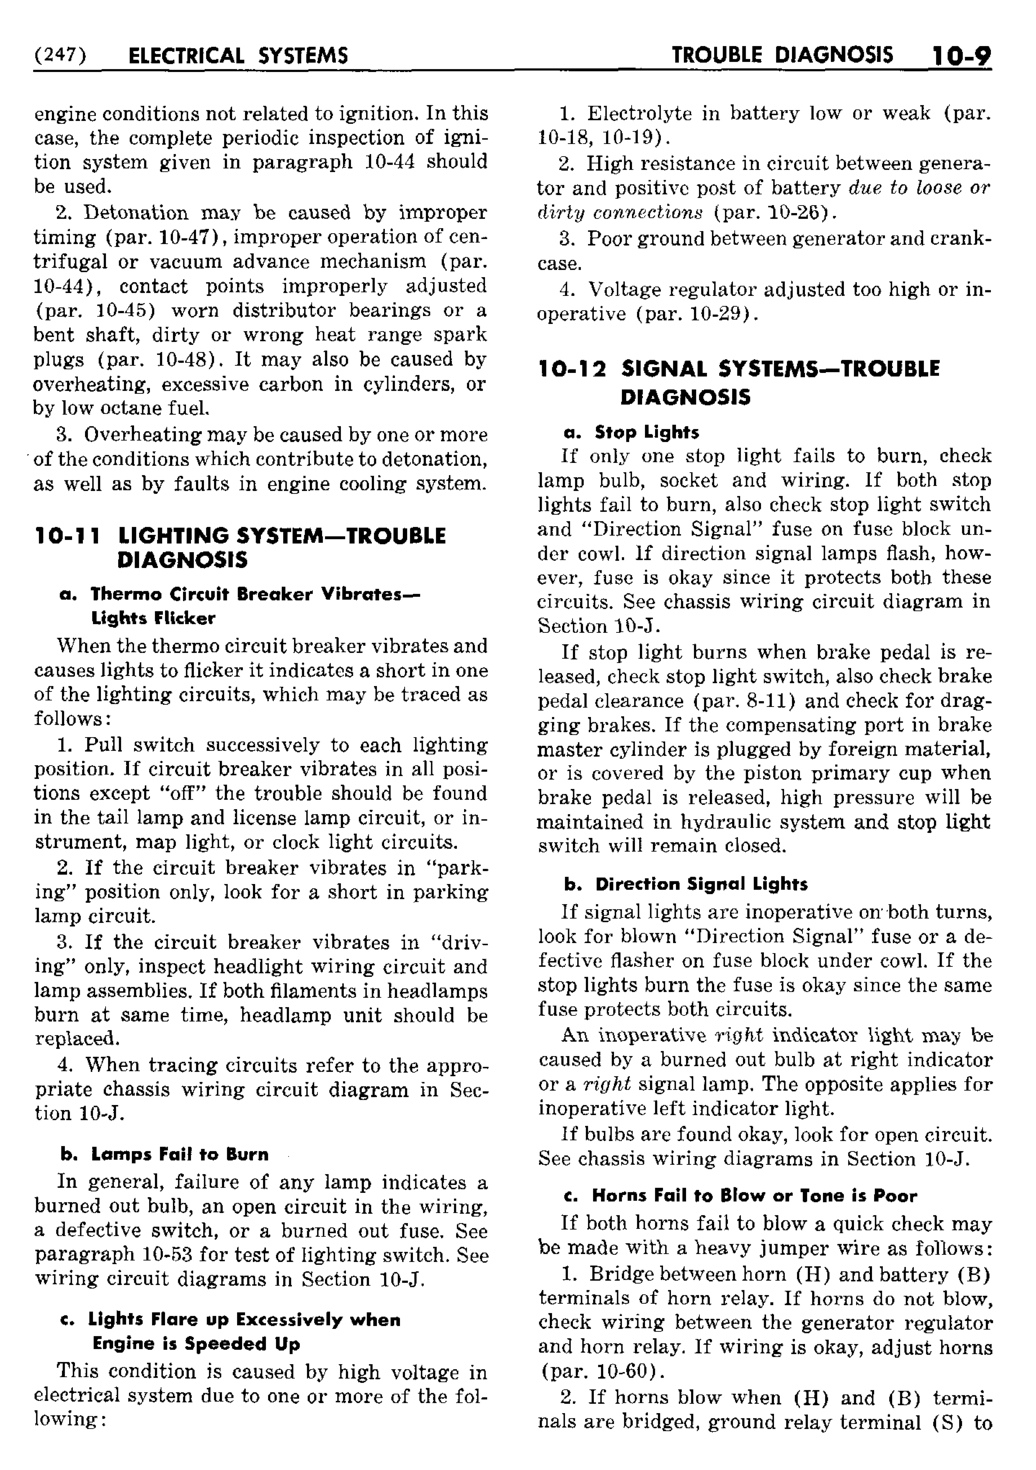 n_11 1950 Buick Shop Manual - Electrical Systems-009-009.jpg